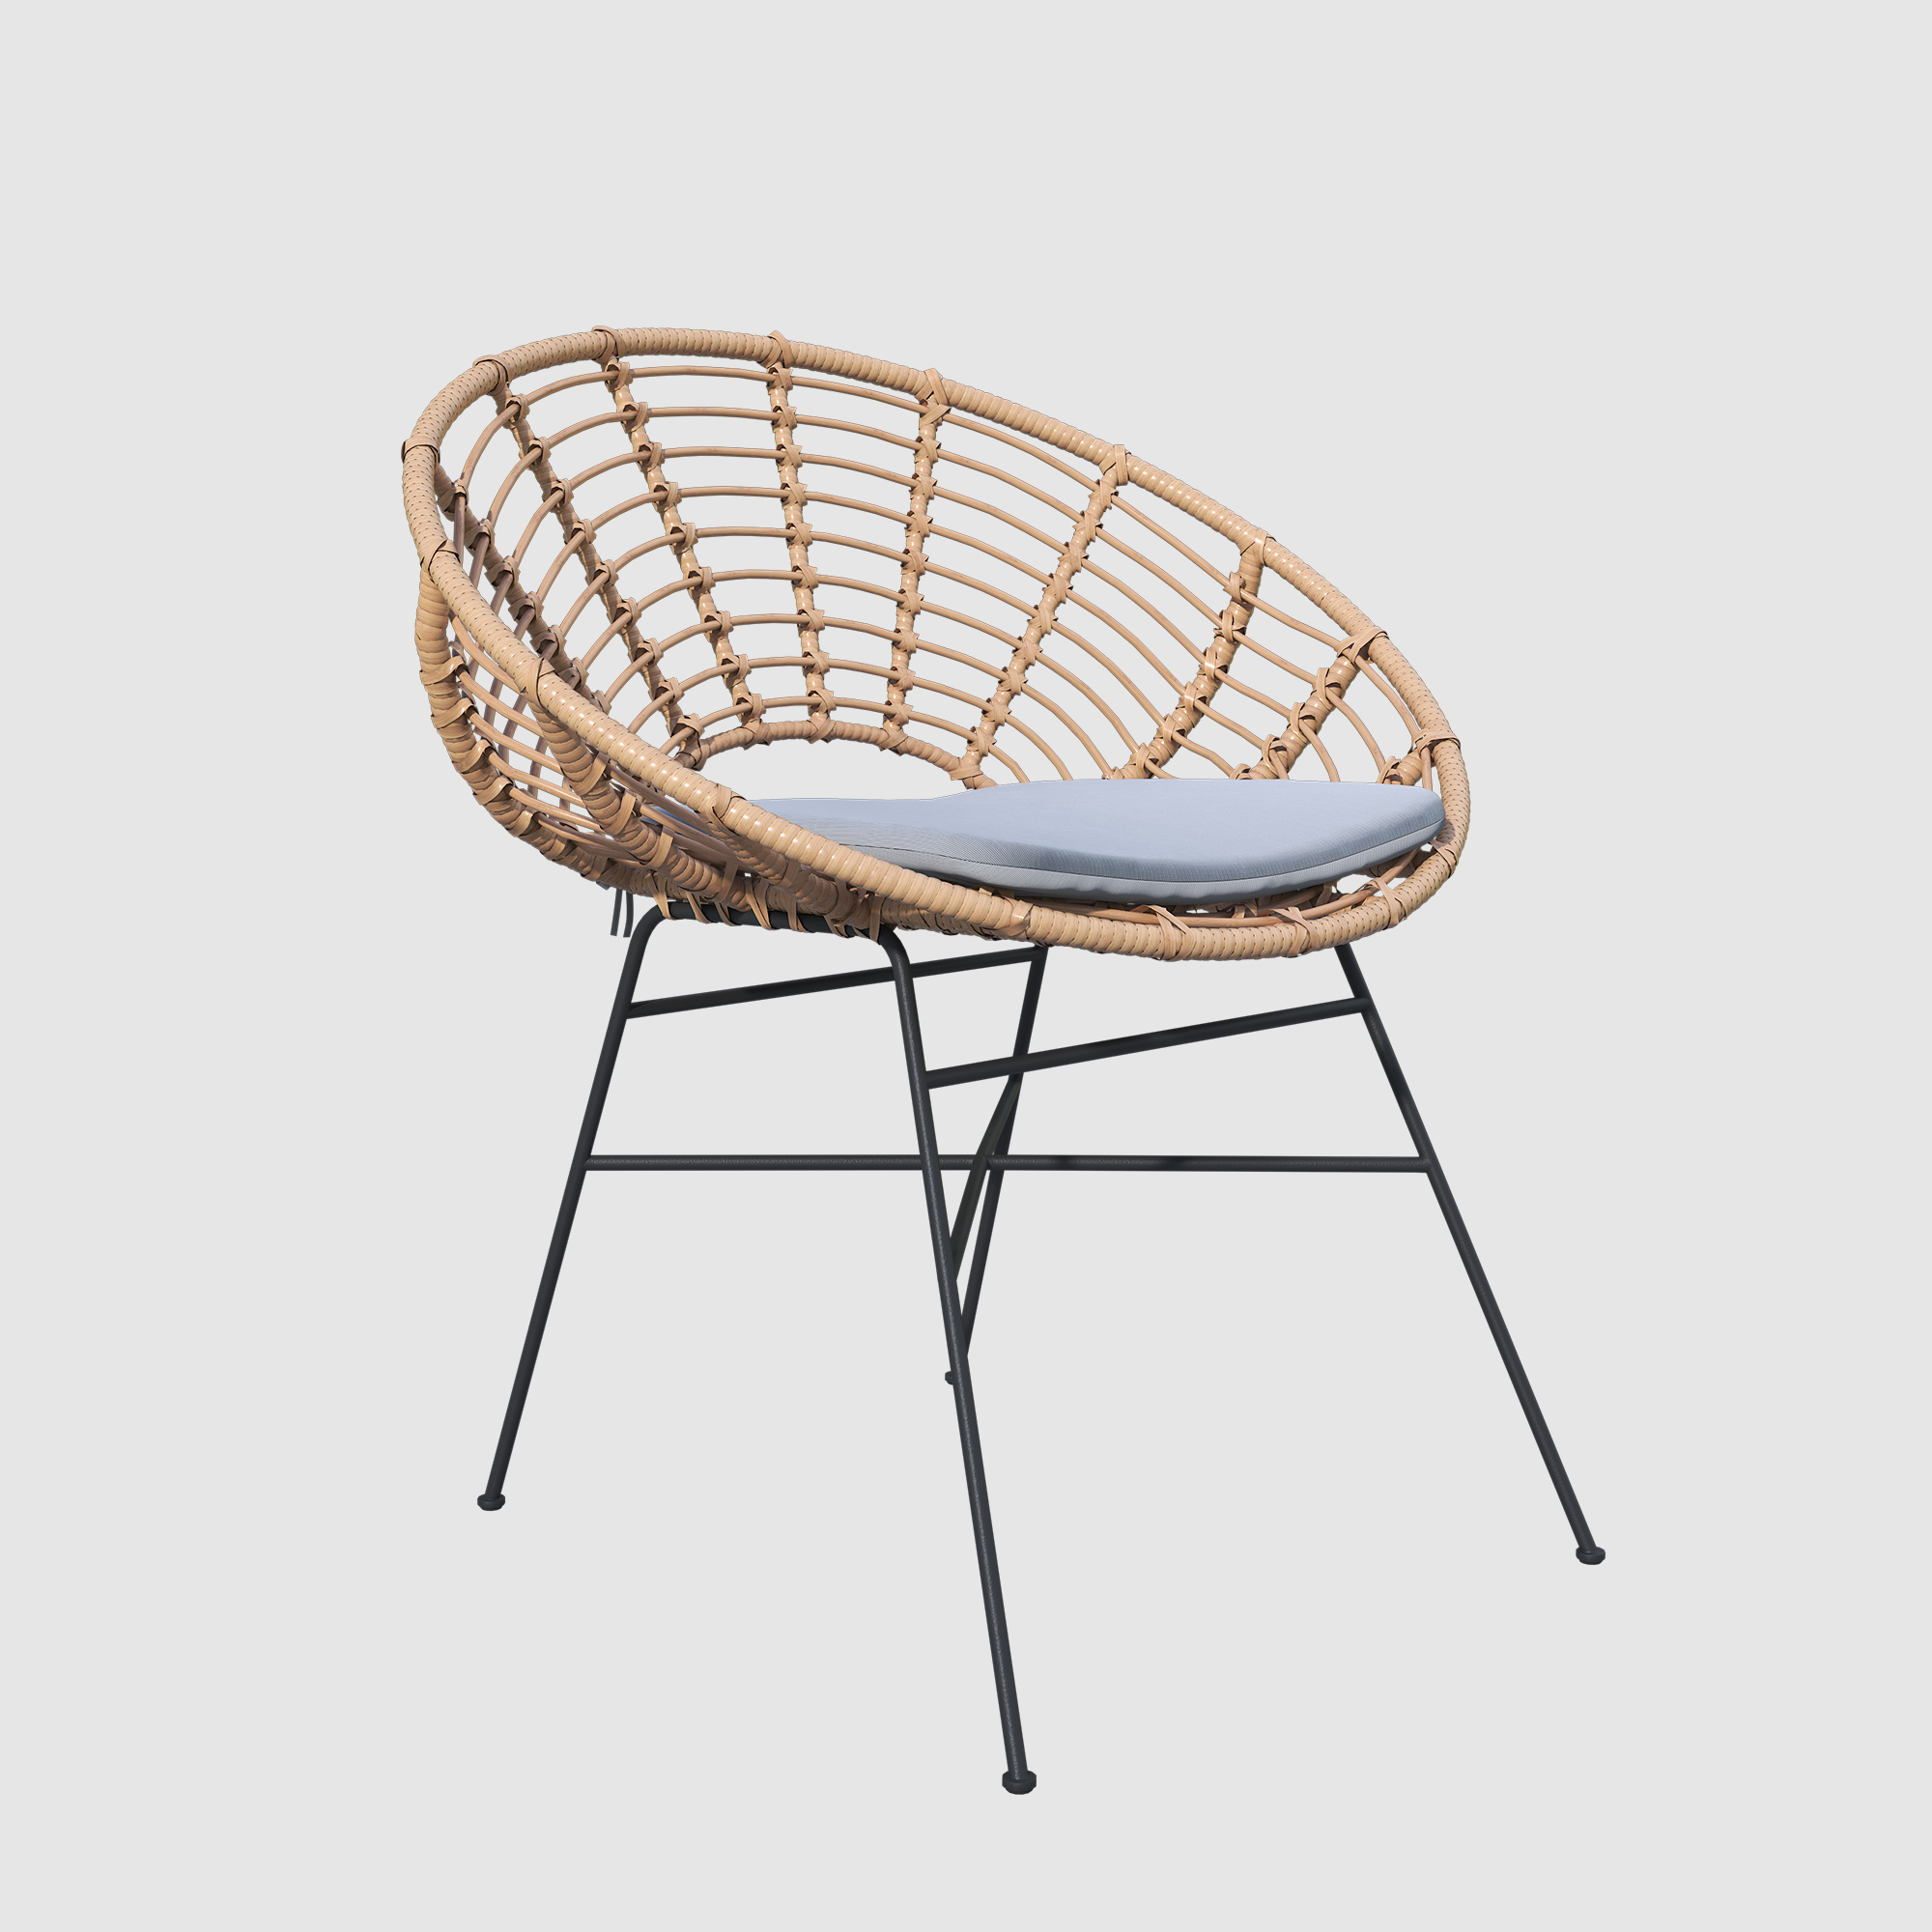 Luxury Wicker Retro Commercial Patio Outdoor Rattan Cafe Chair Patio Chair